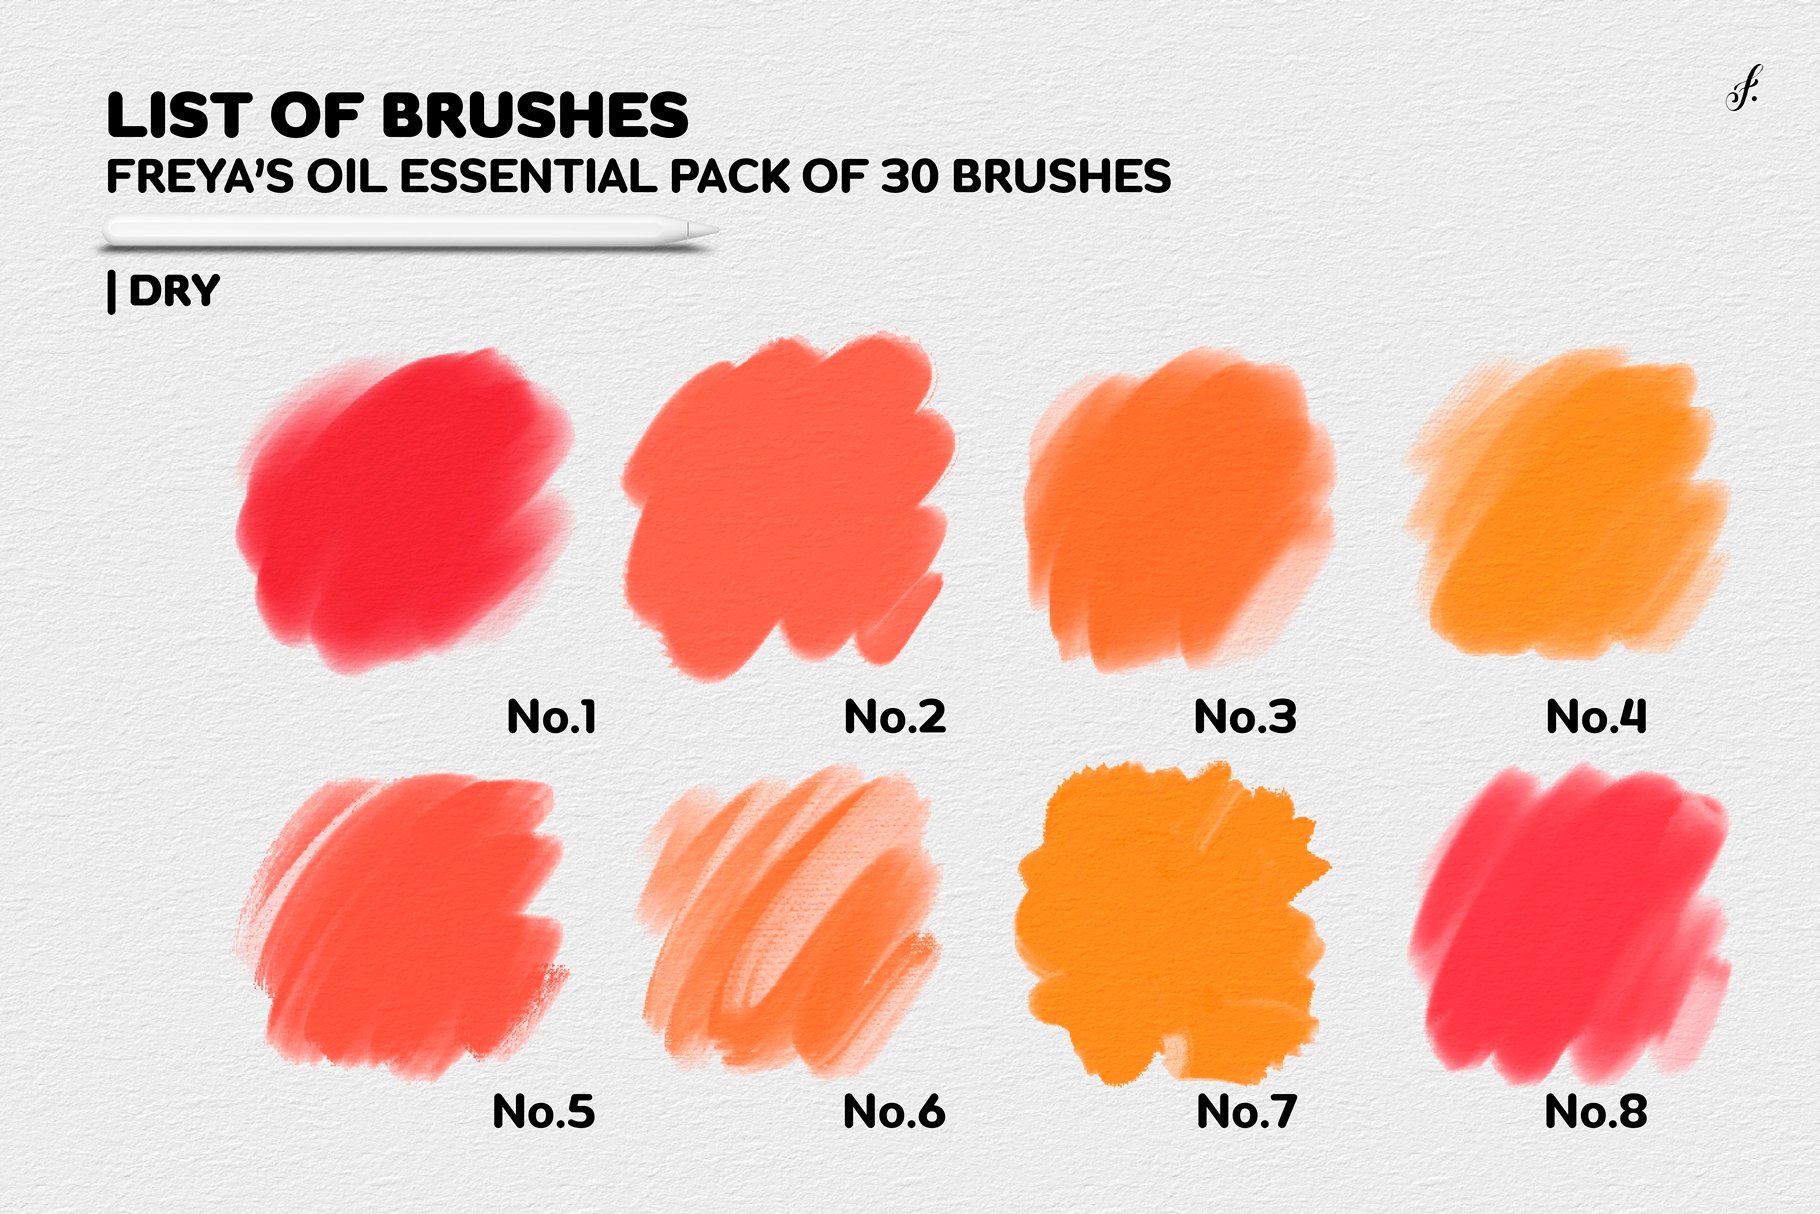 Marker Brushes for Procreate 5 - Design Cuts